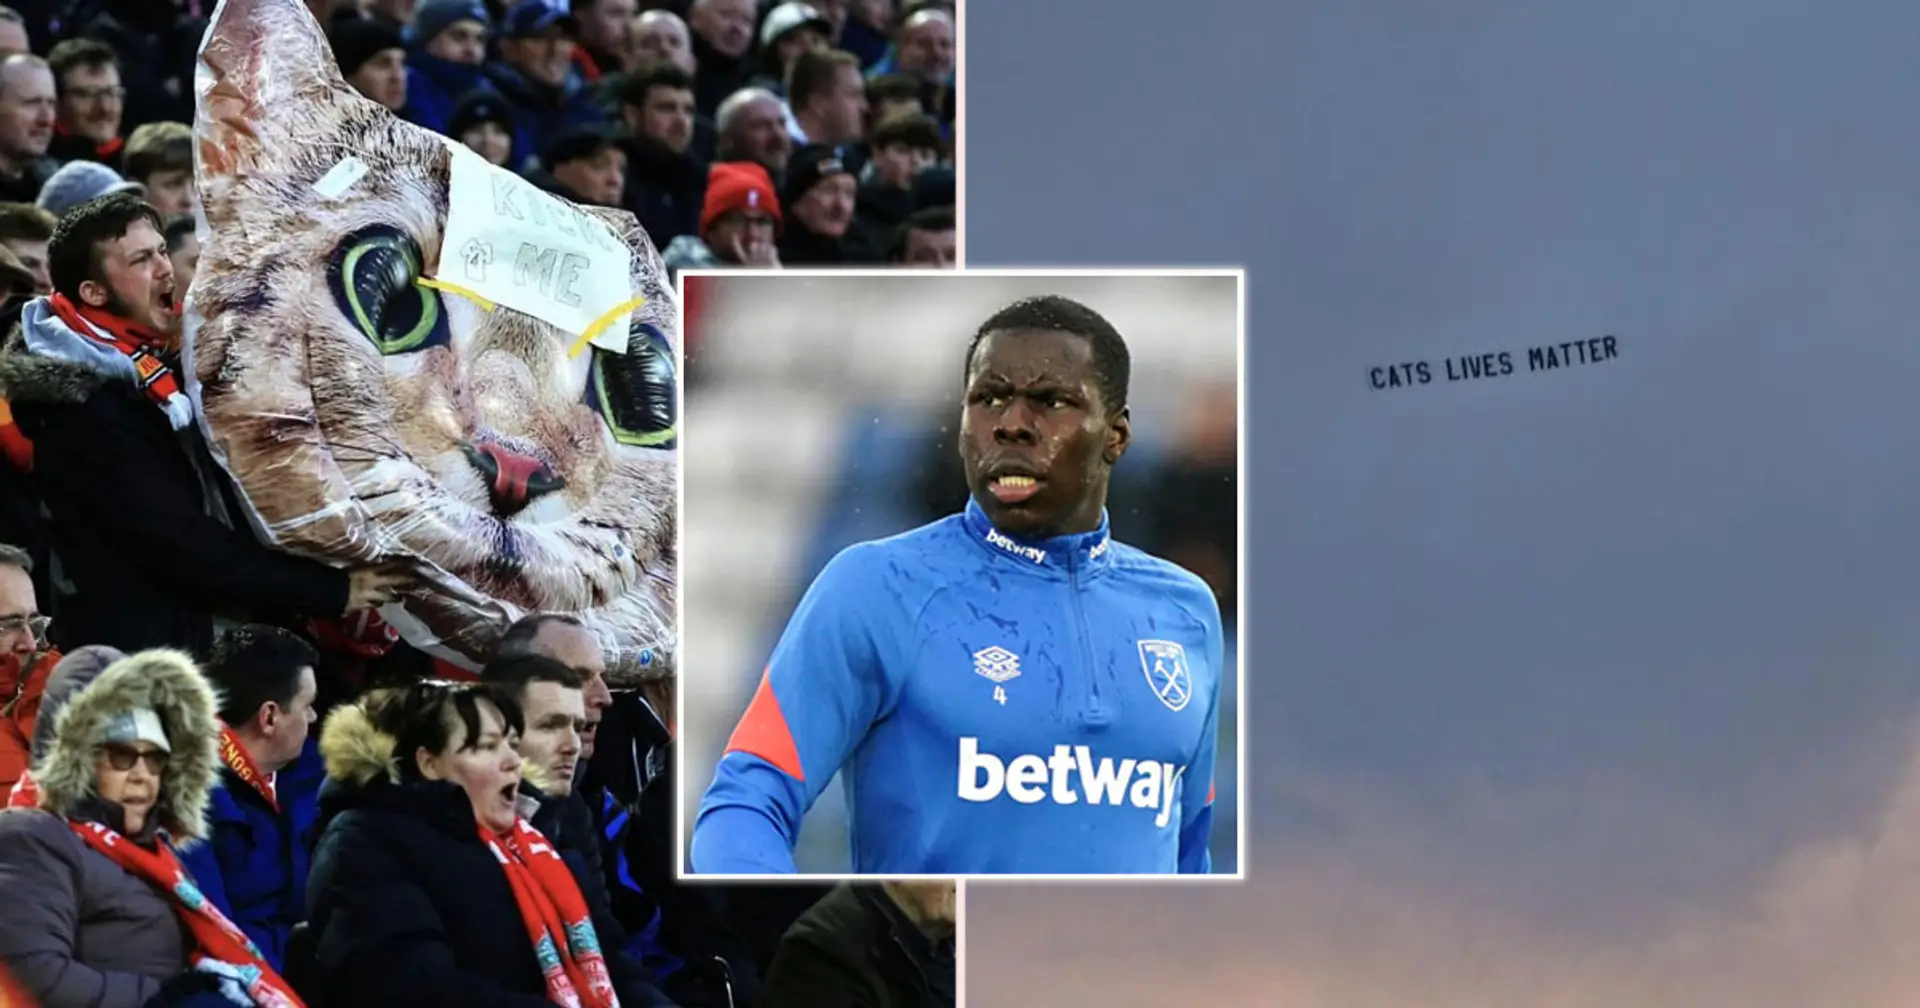 Plane flying 'Cat Lives Matter' banner spotted over Anfield during Liverpool-West Ham game